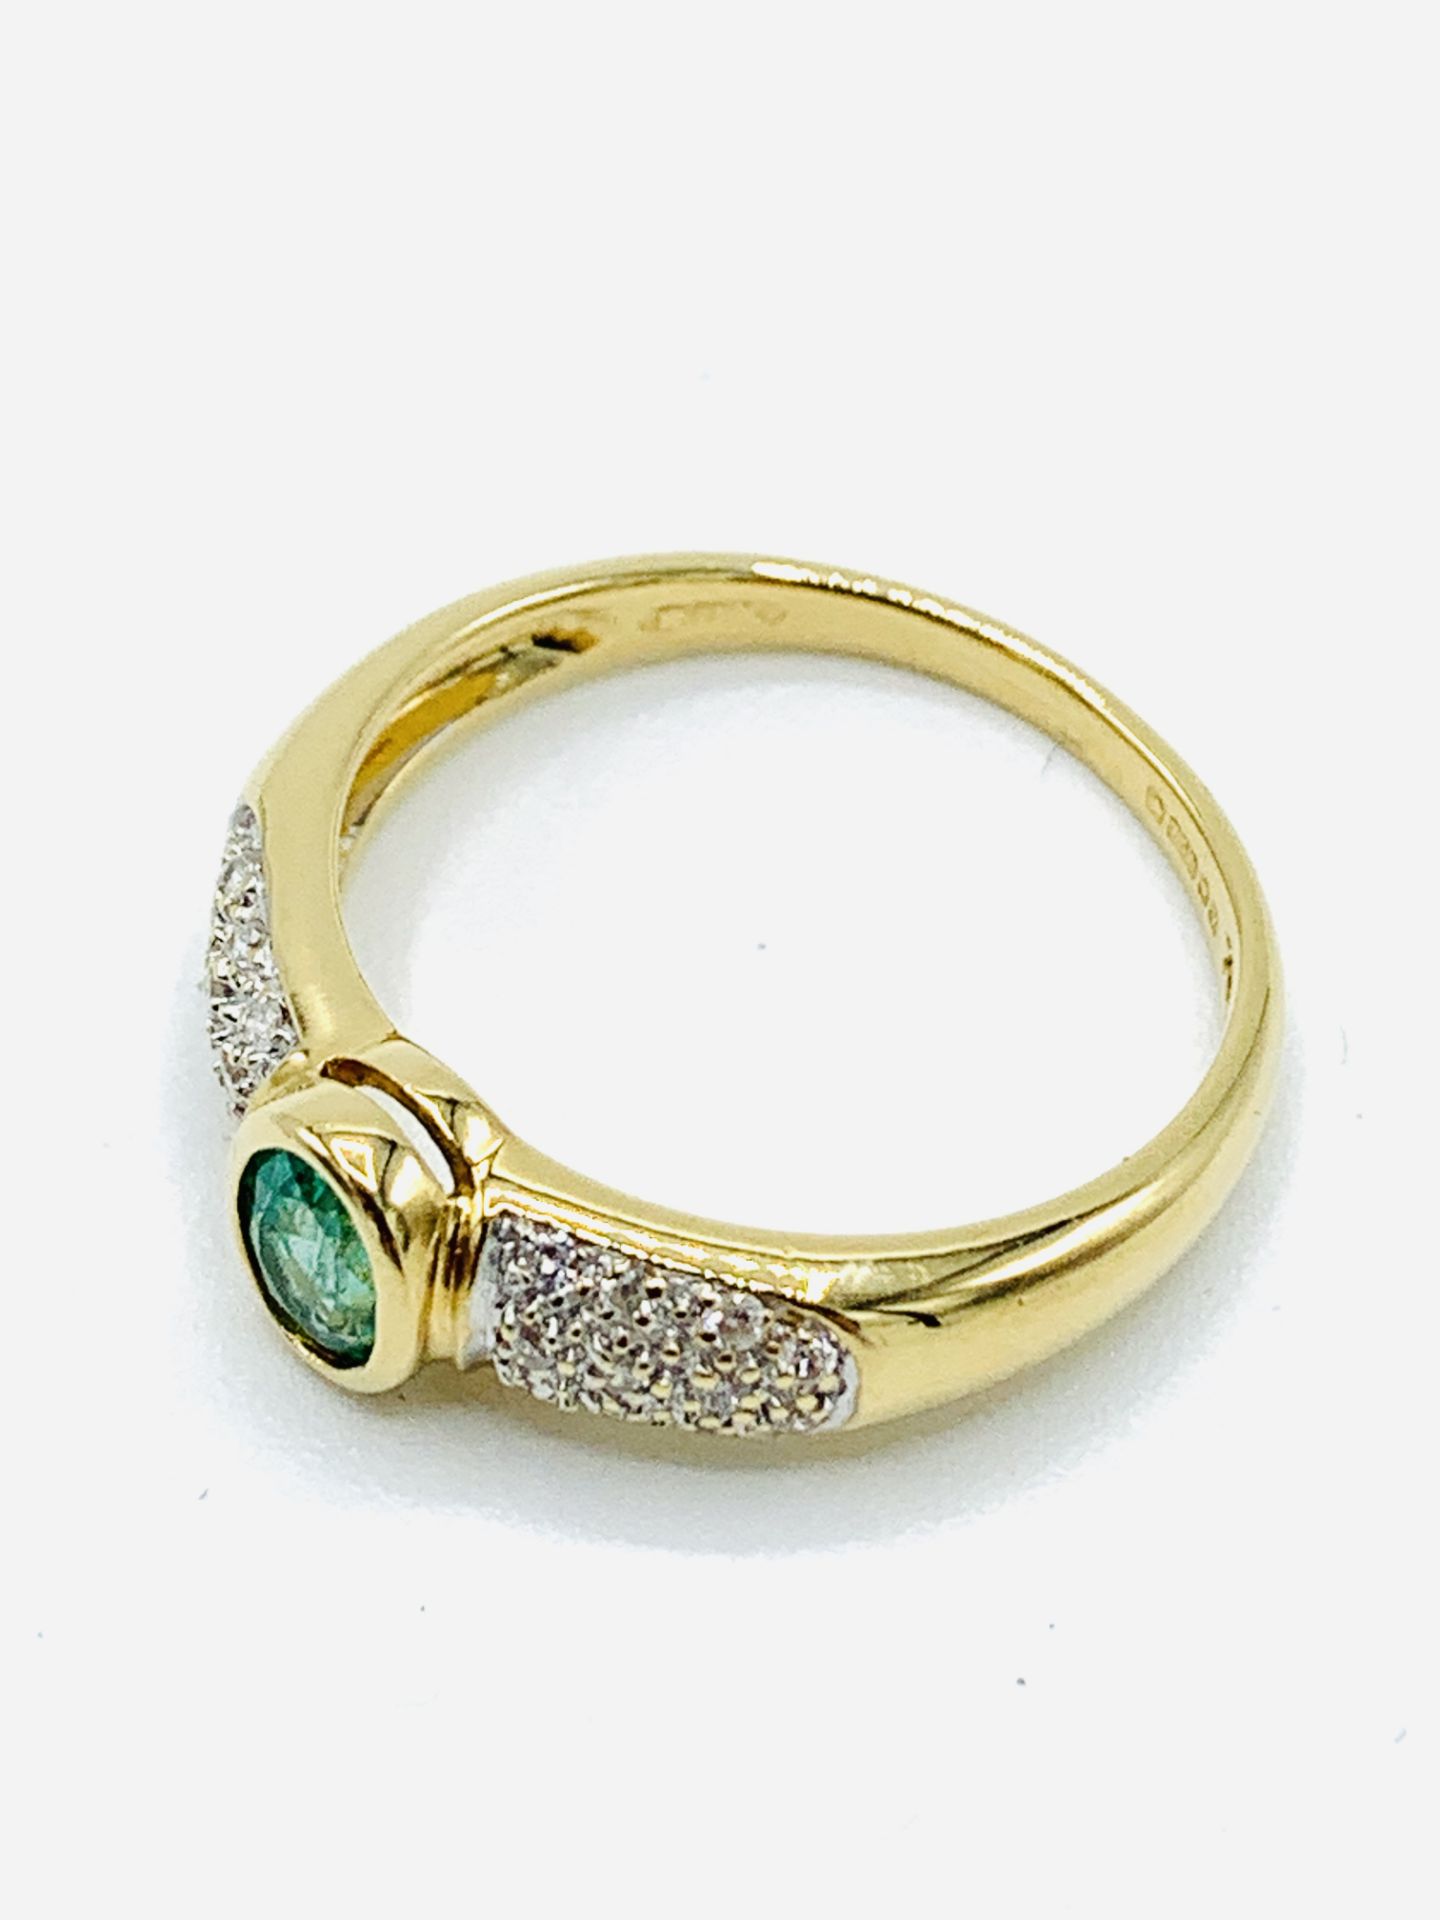 18ct gold emerald and diamond ring - Image 4 of 5